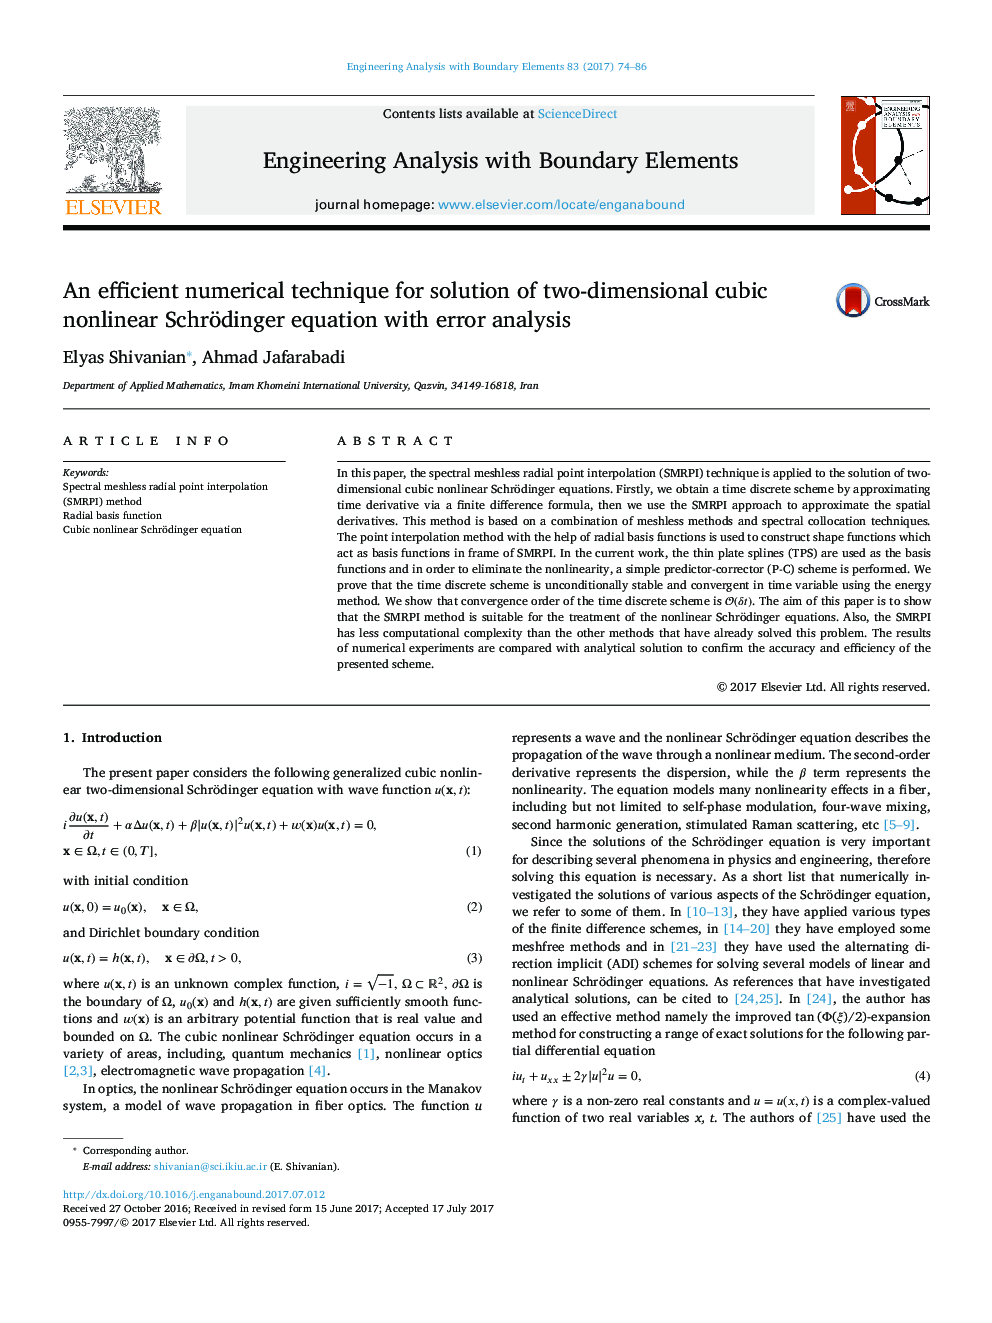 An efficient numerical technique for solution of two-dimensional cubic nonlinear Schrödinger equation with error analysis